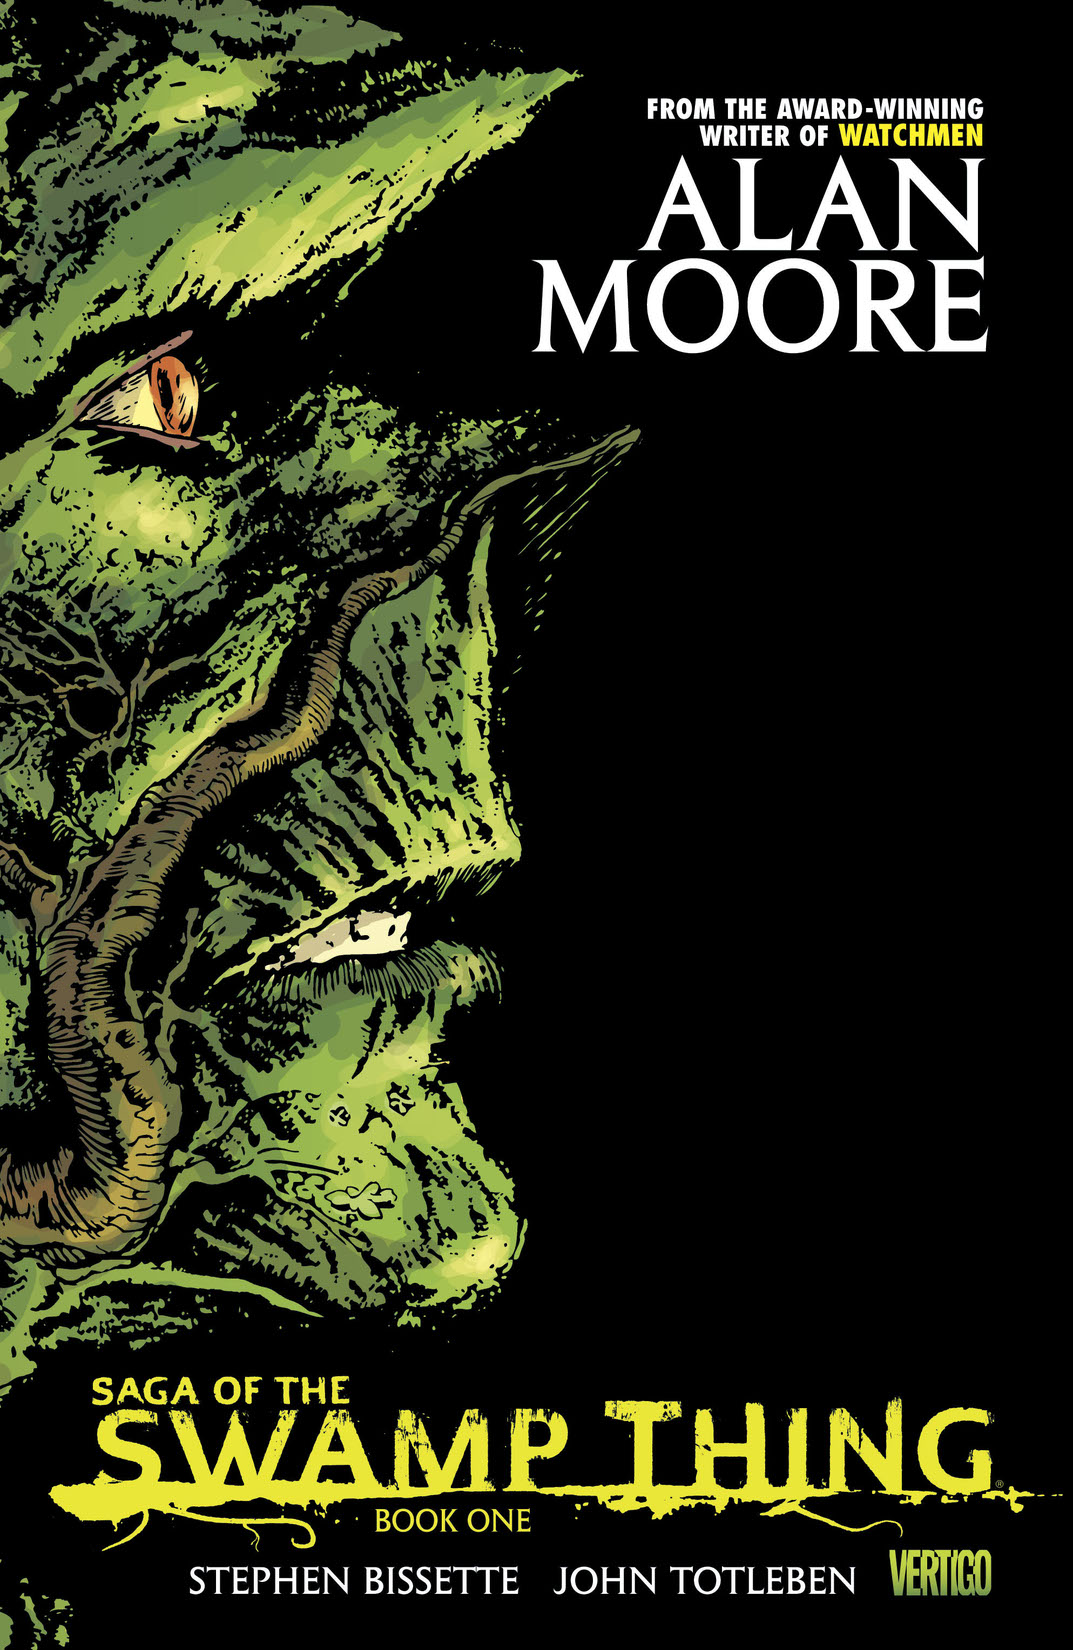 Saga of the Swamp Thing Book One preview images